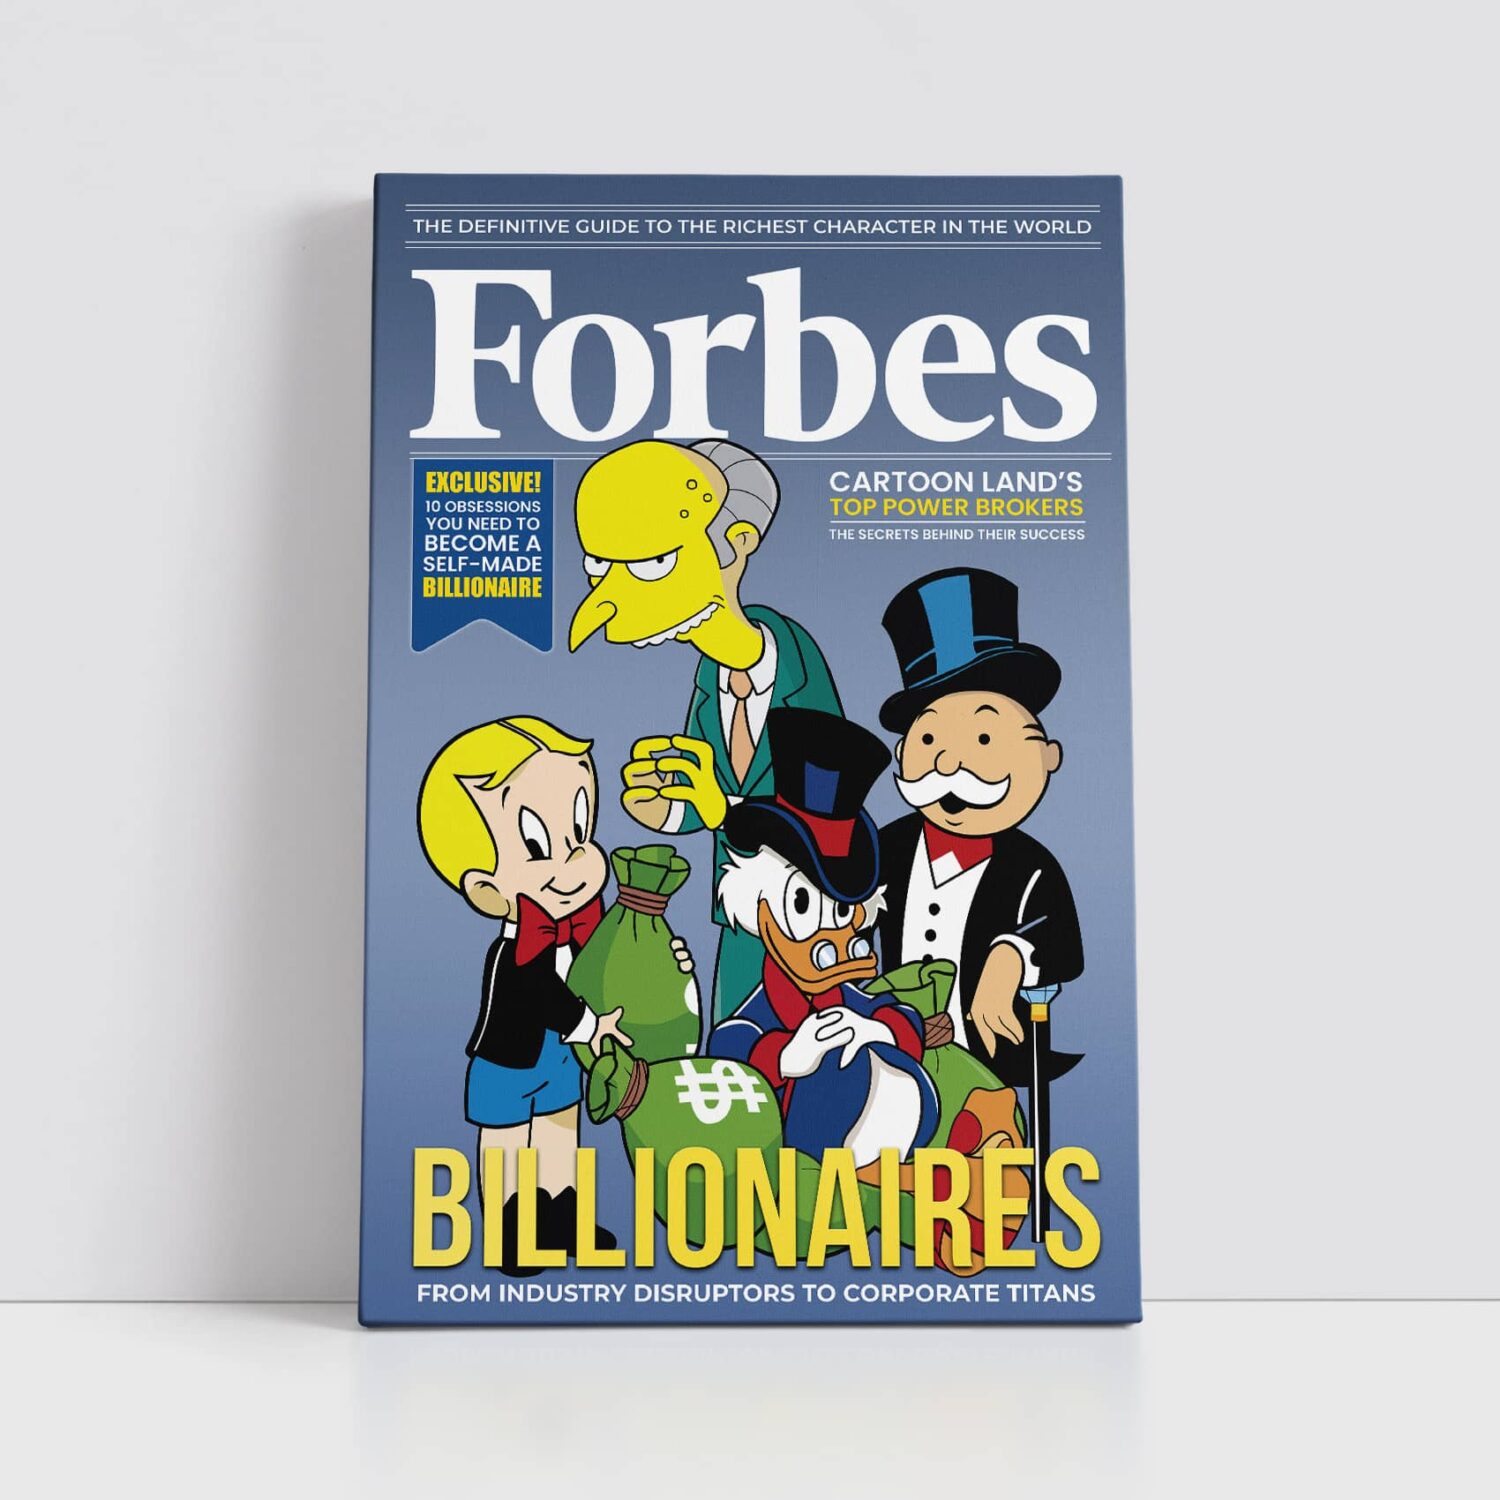 Forbes magazine cover featuring some cartoon billionaires including Richie Rich, Scrooge McDuck, Montgomery Burns and Milburn Pennybags